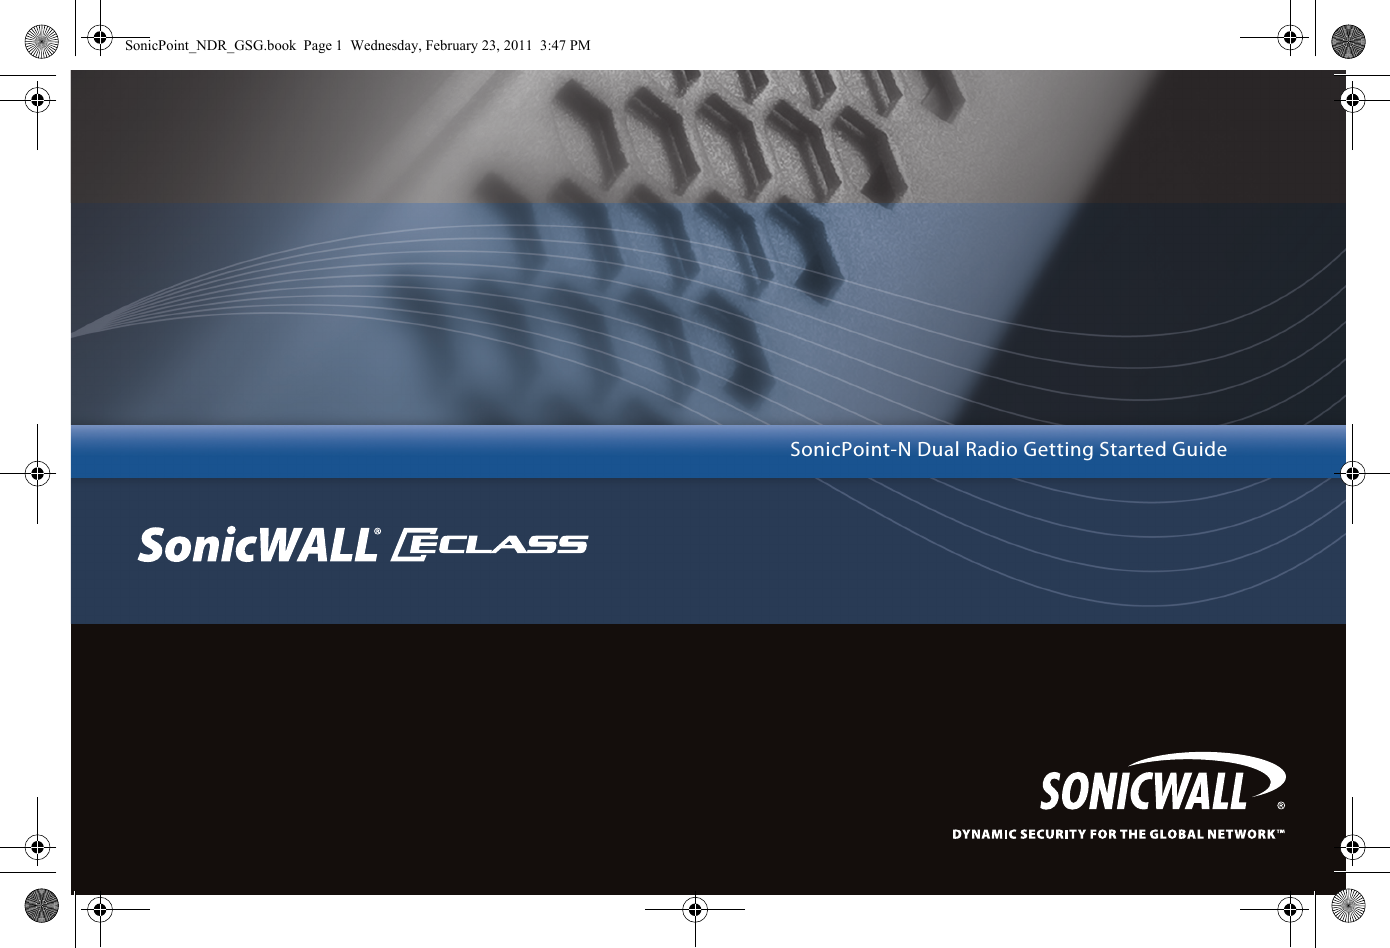 Best Practices Sonicwall Deployment